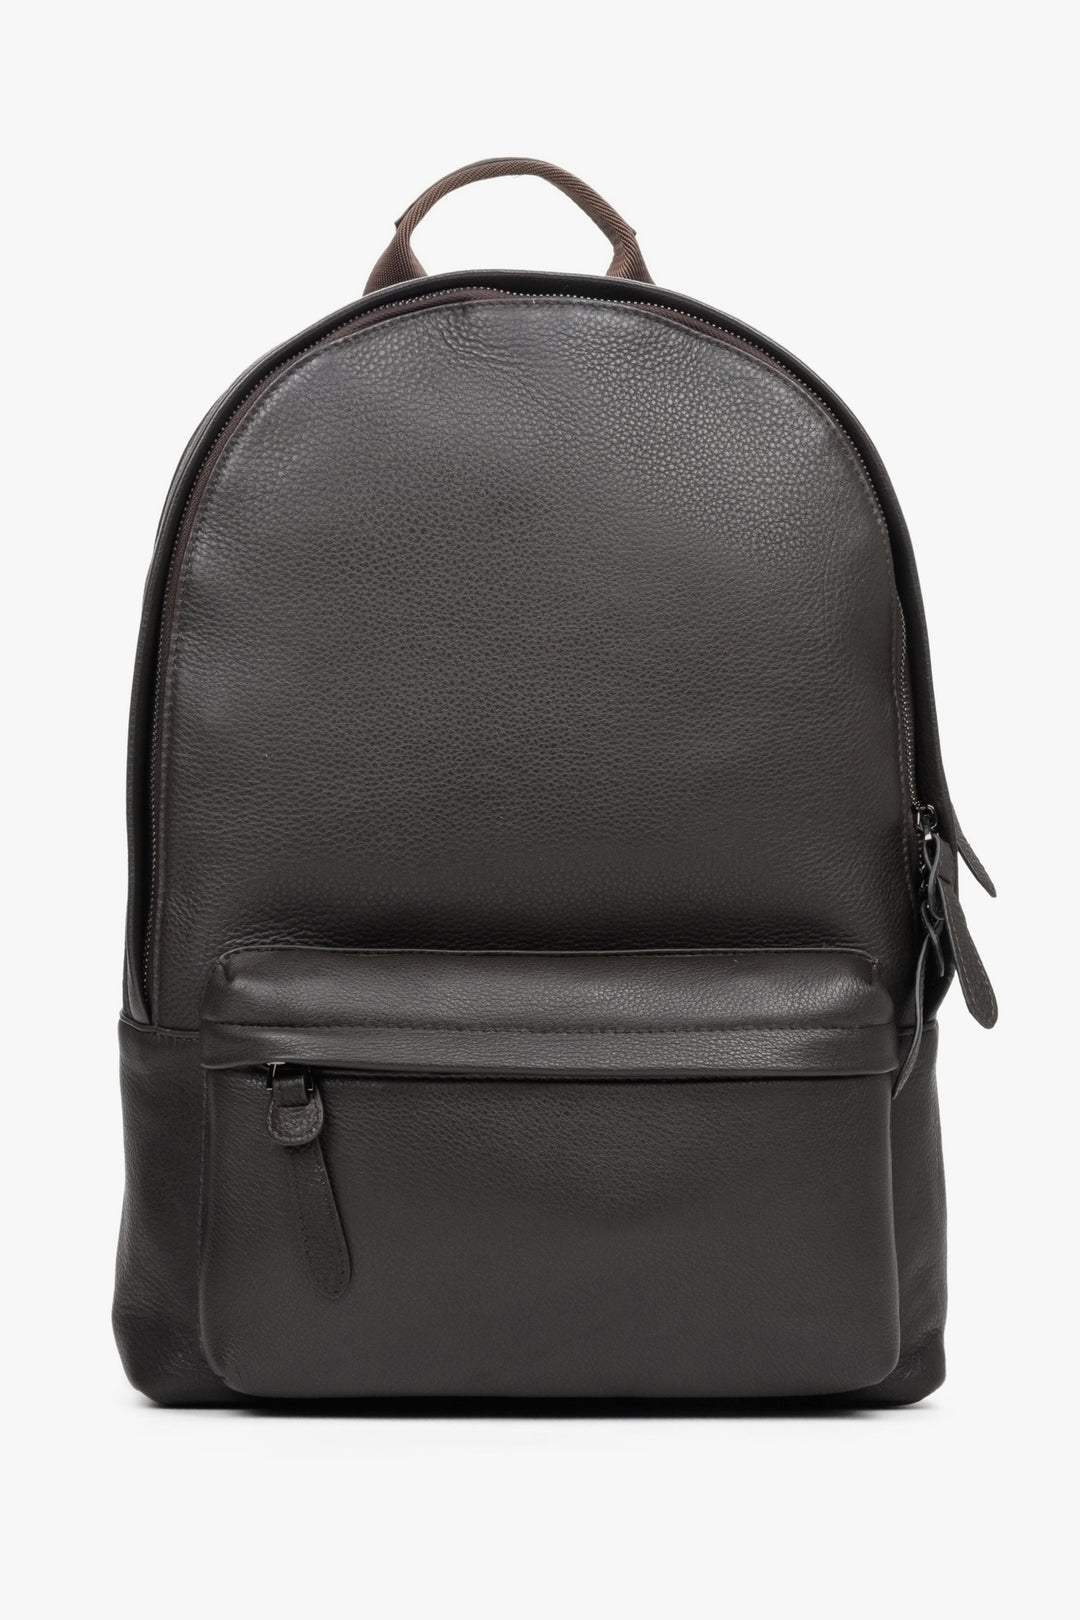 Large, leather men's dark brown backpack by Estro.